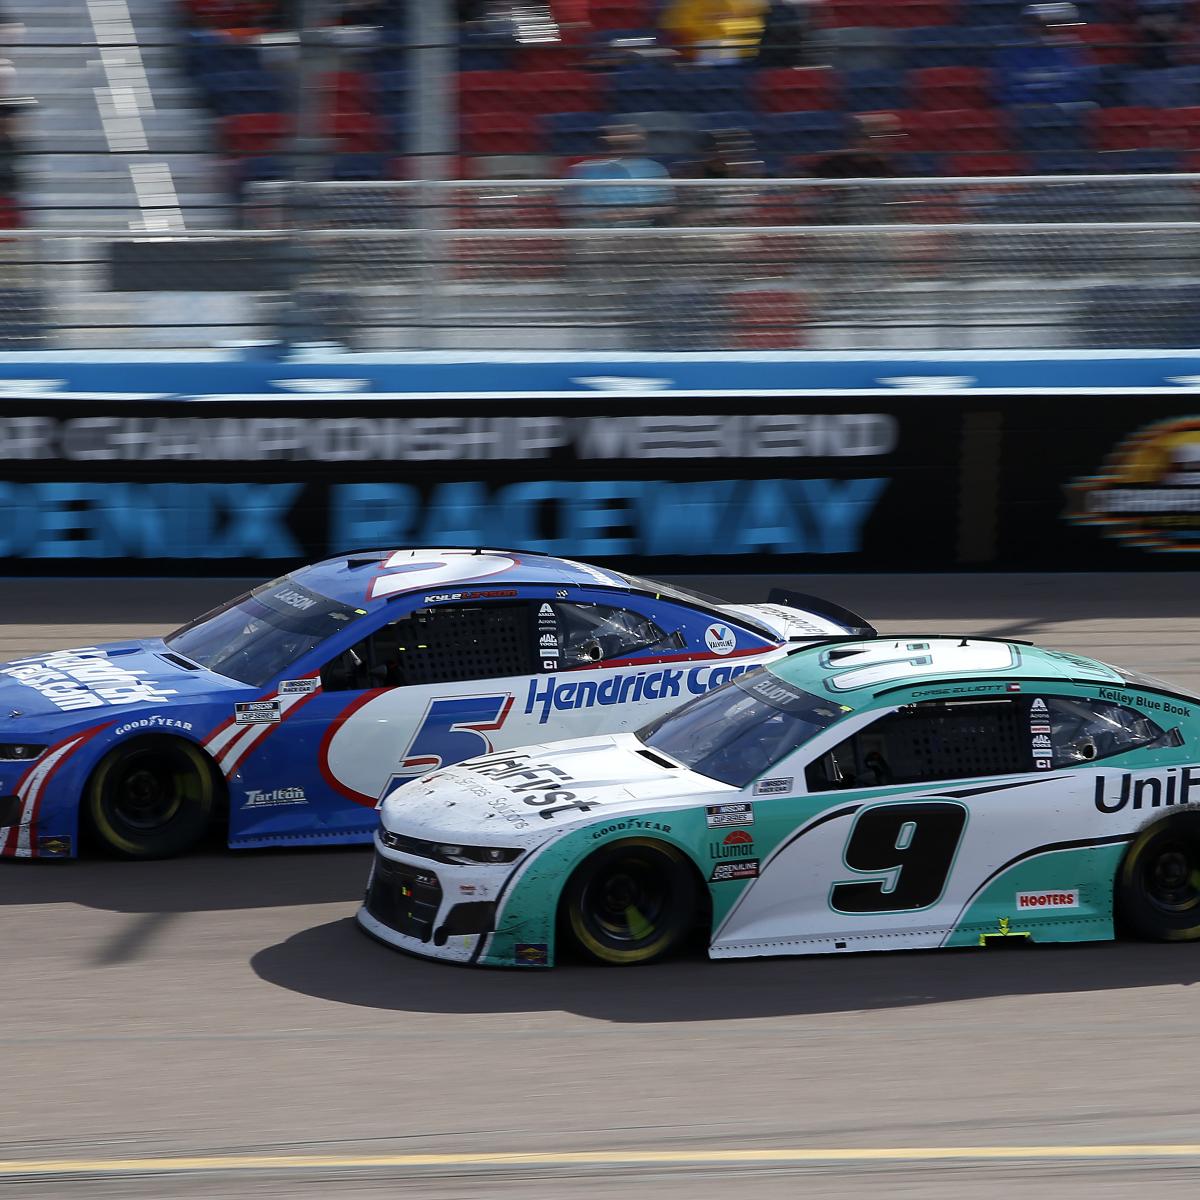 NASCAR at Phoenix 2021: Odds, TV Schedule, Live Stream and Drivers